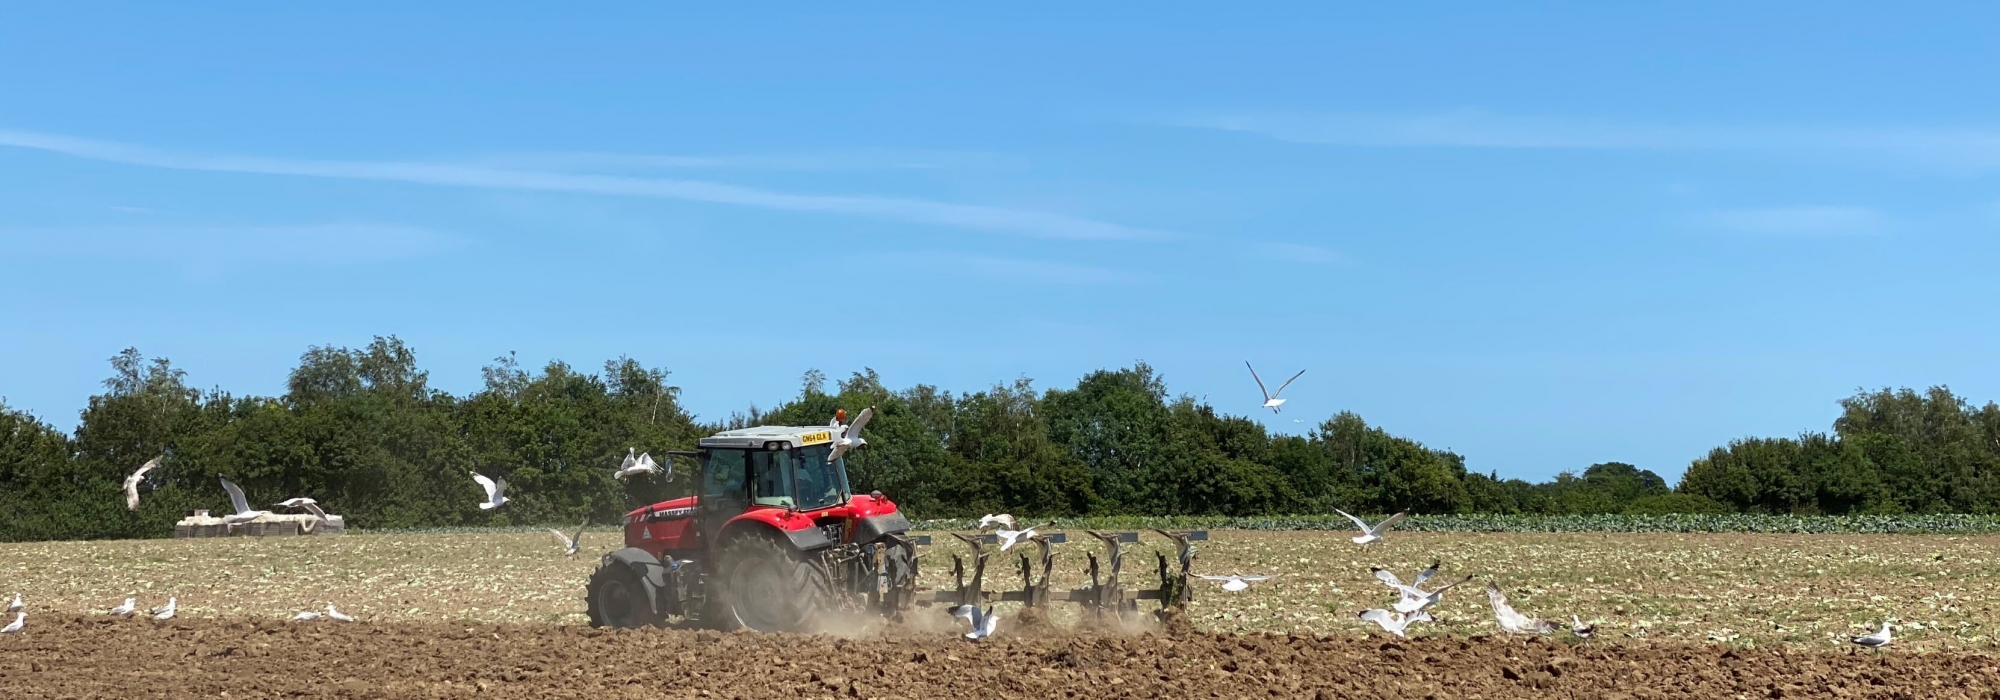 Red tractor ploughing field on a sunny day